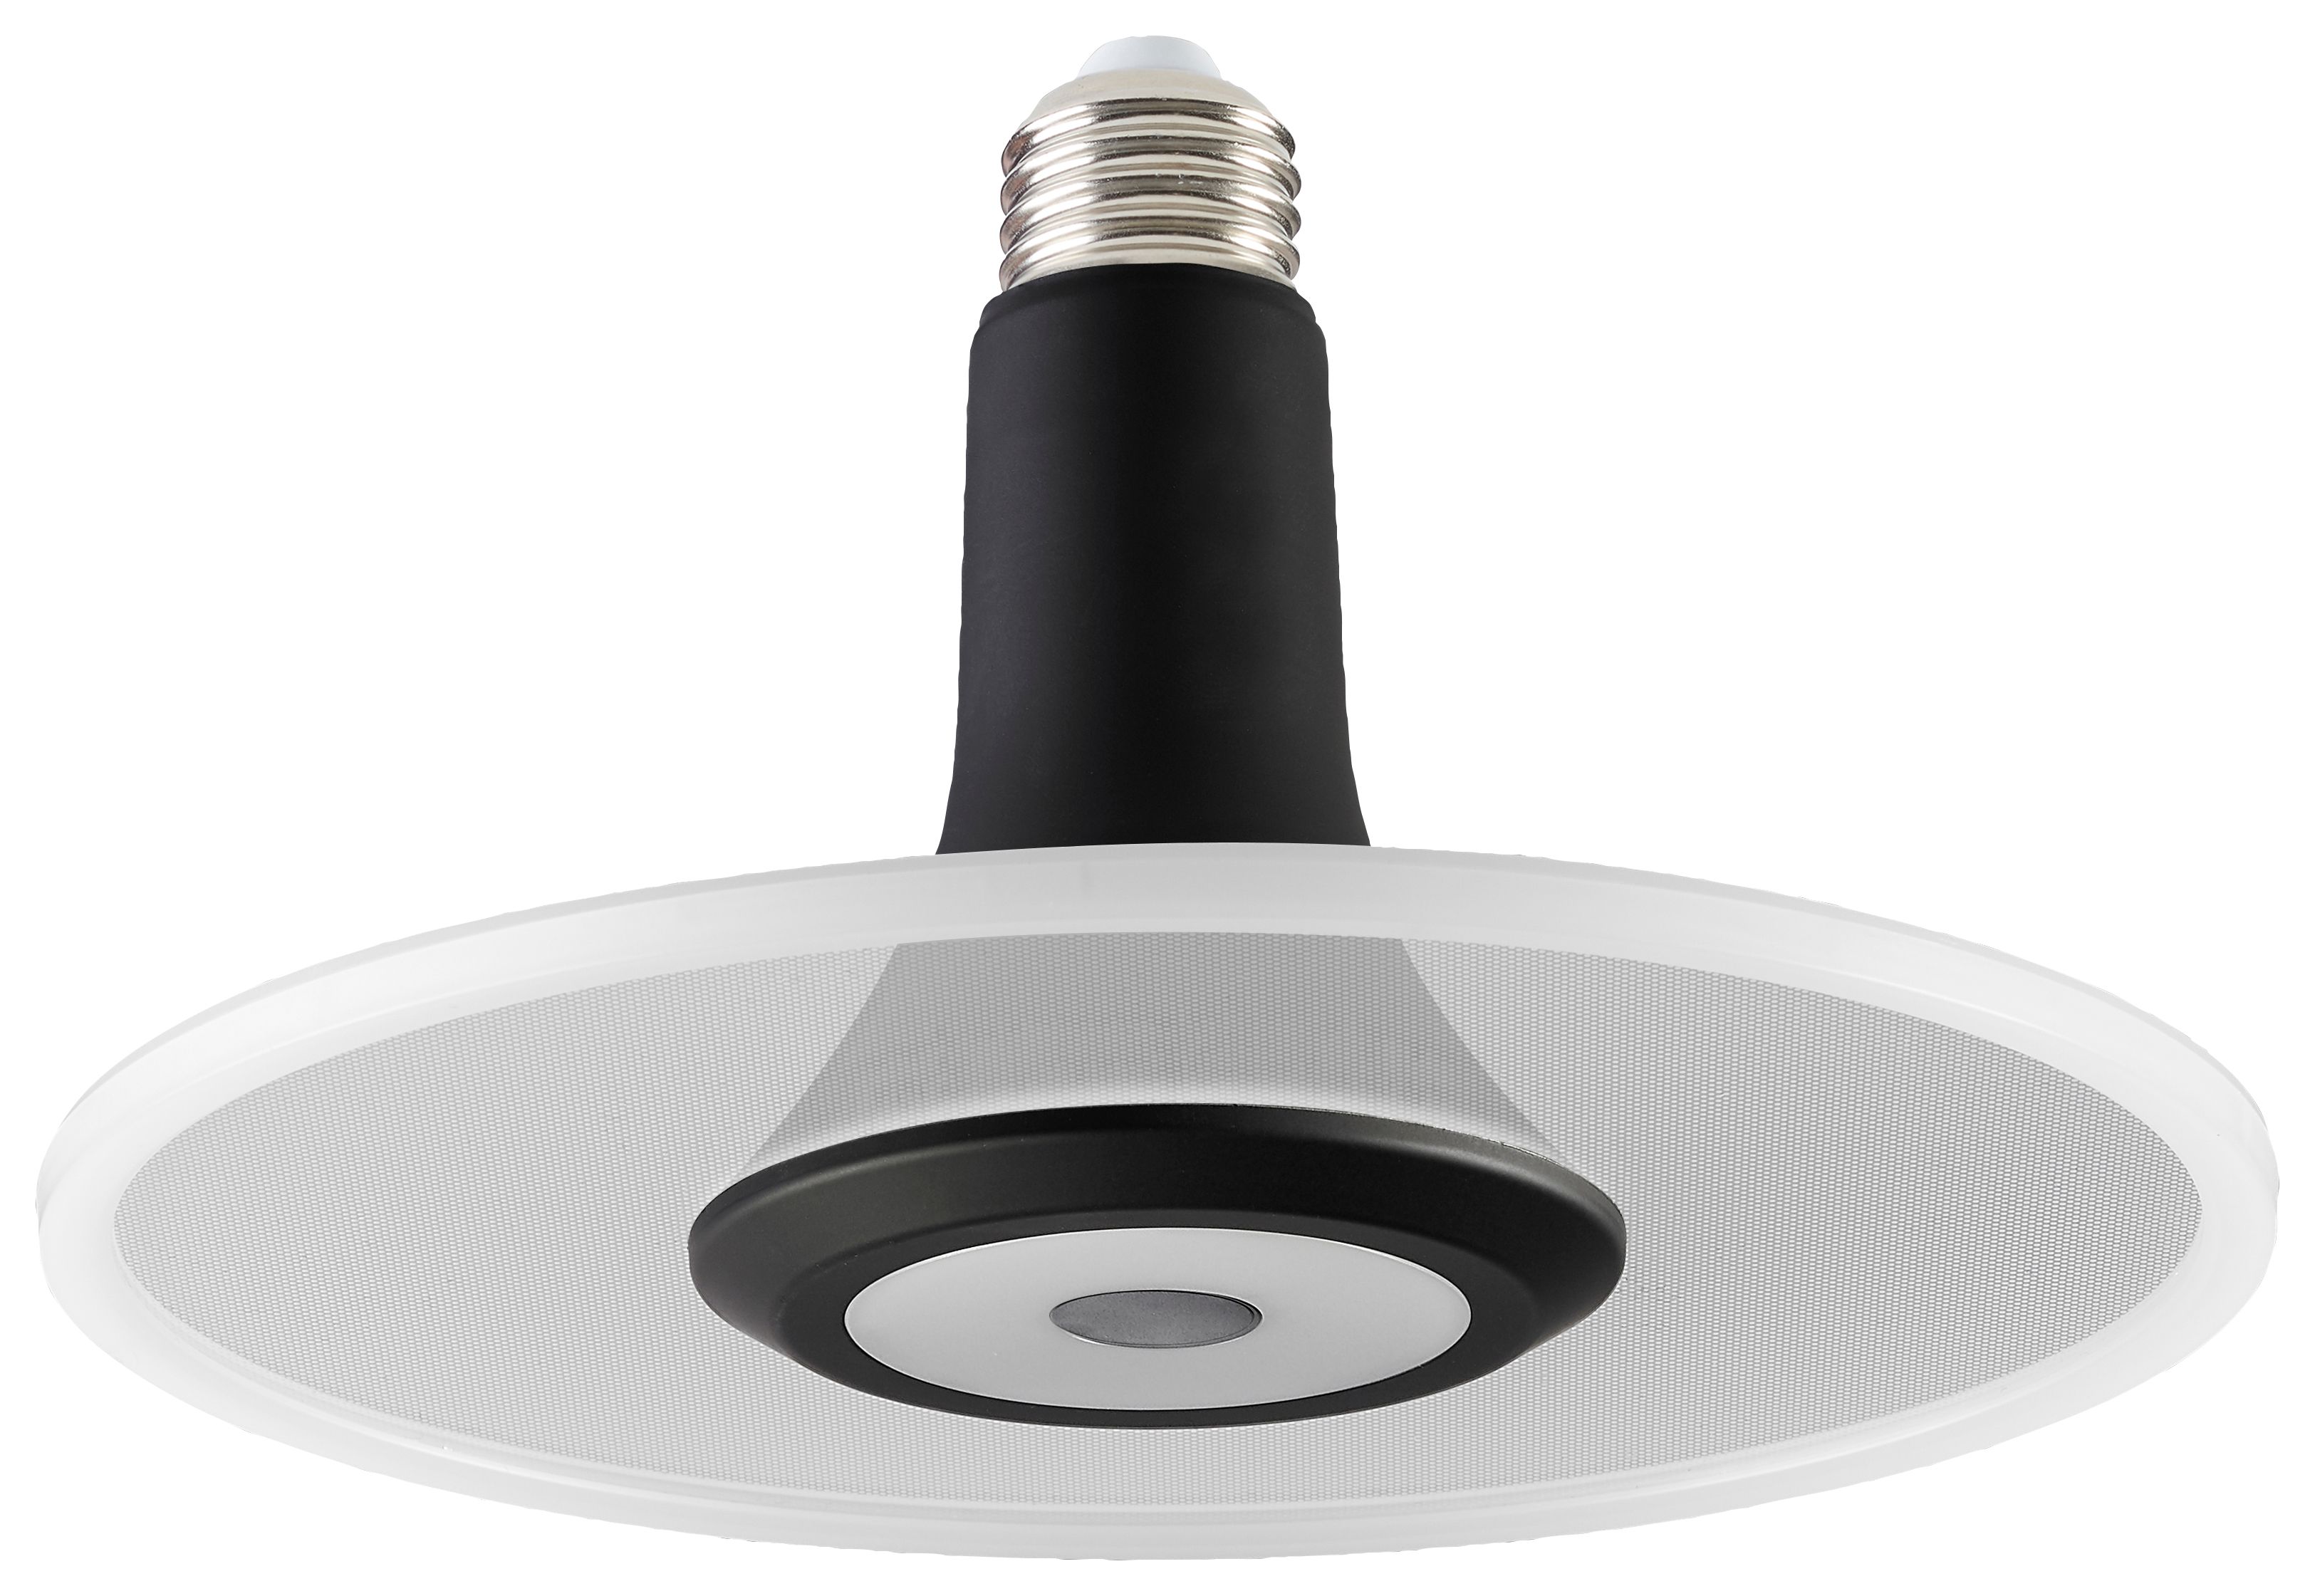 Image of Sylvania LED Radiance Lampinaire 1000Lm Dimmable E27 Fitting - Black